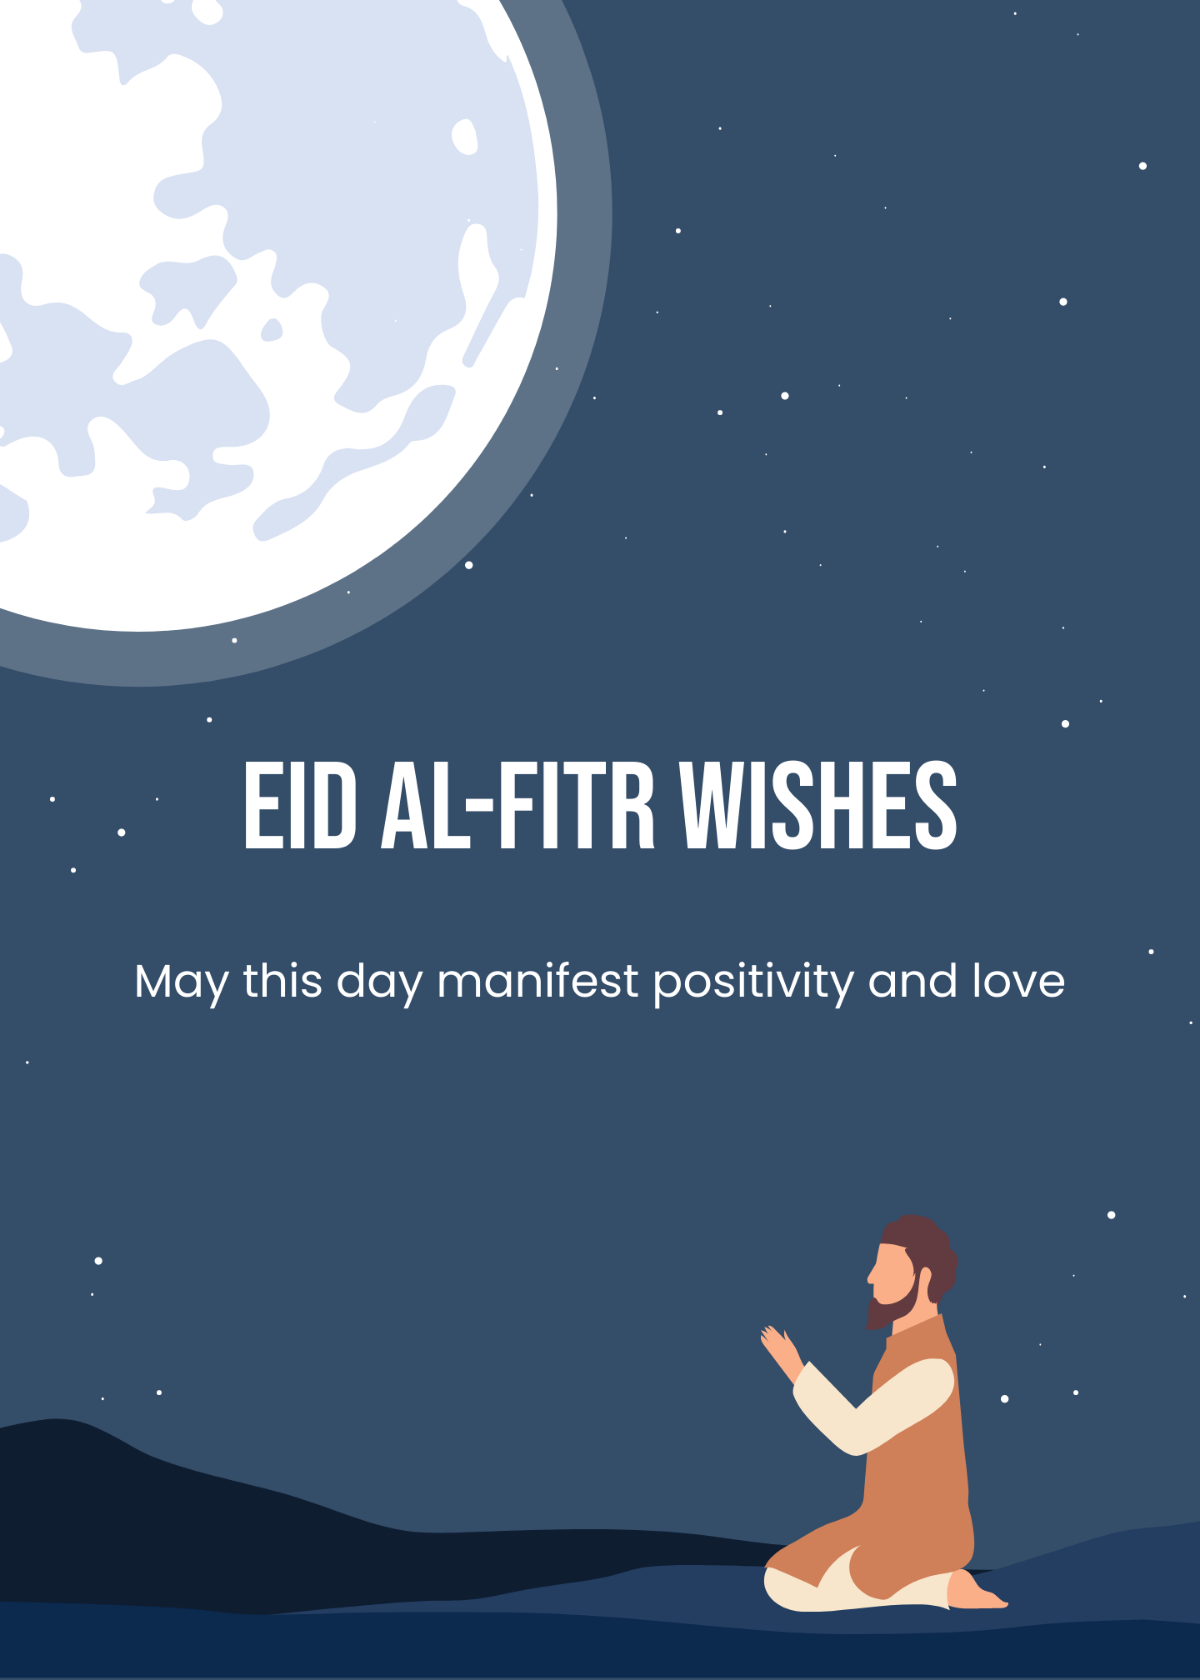 Free Eid Al Fitr Greeting Card Templates And Examples Edit Online